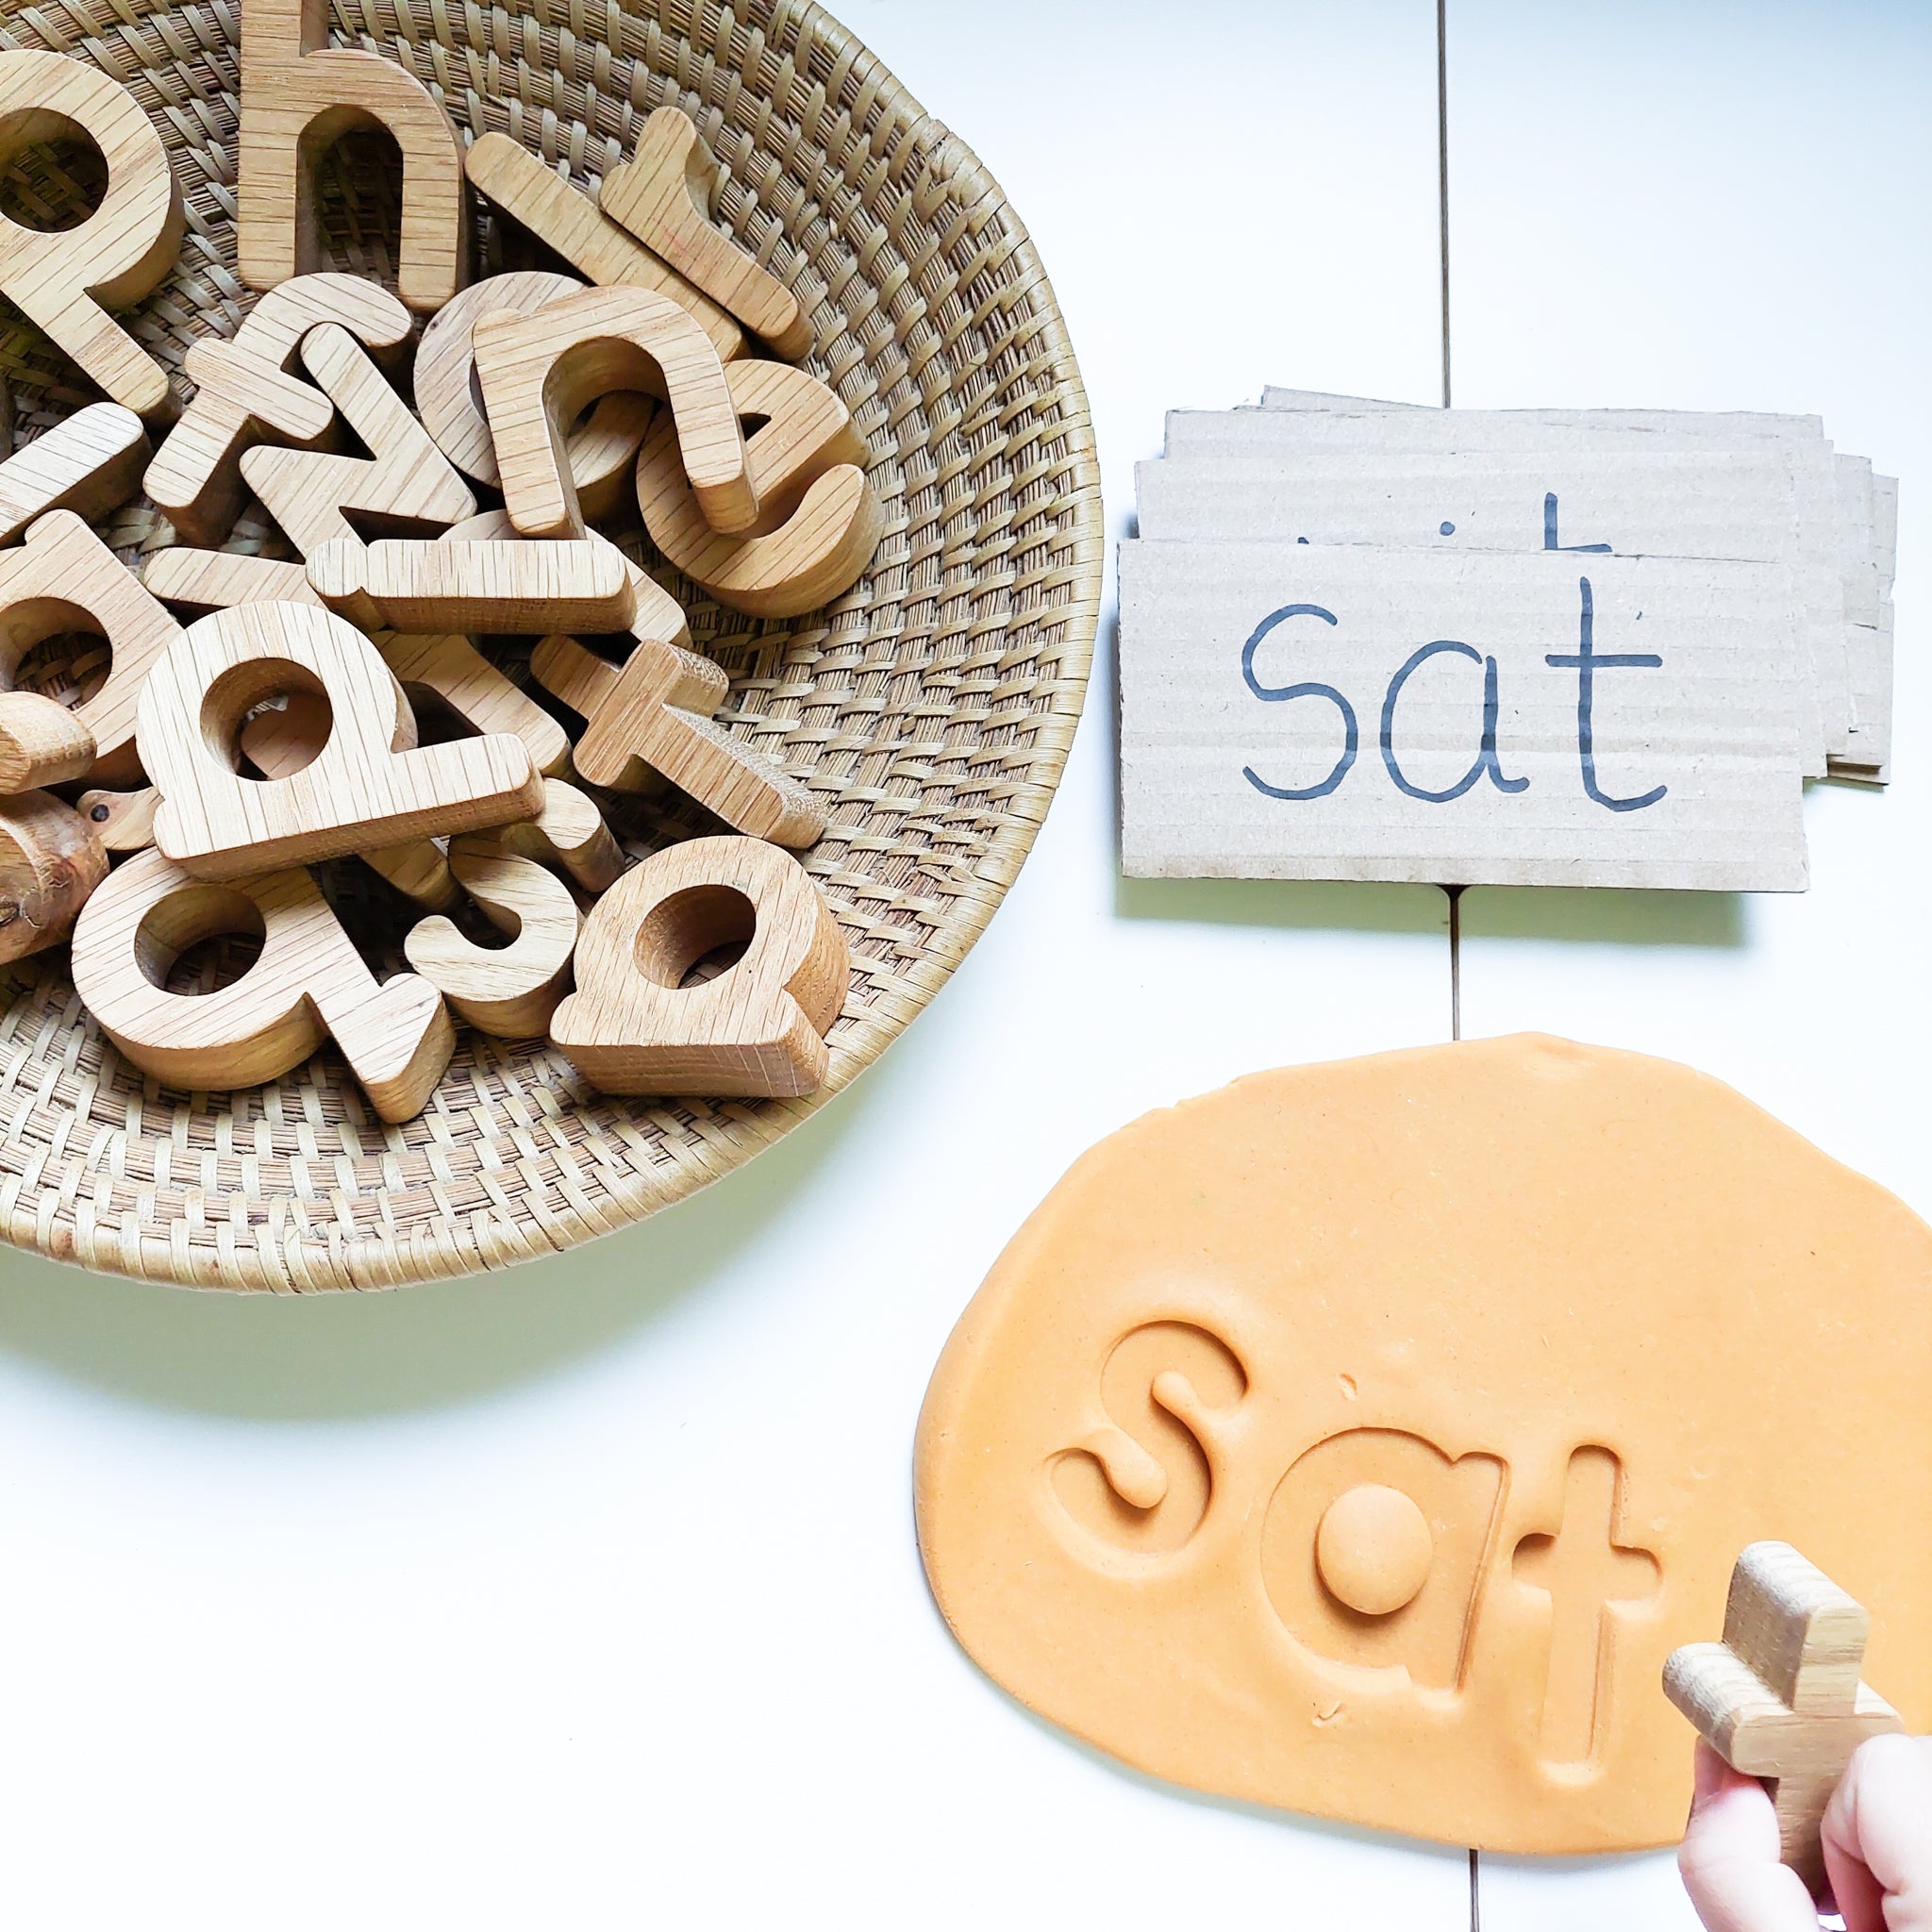 handmade wooden oak alphabet letters toy being used to learn phonics "satpin" whilst being imprinted into playdough.